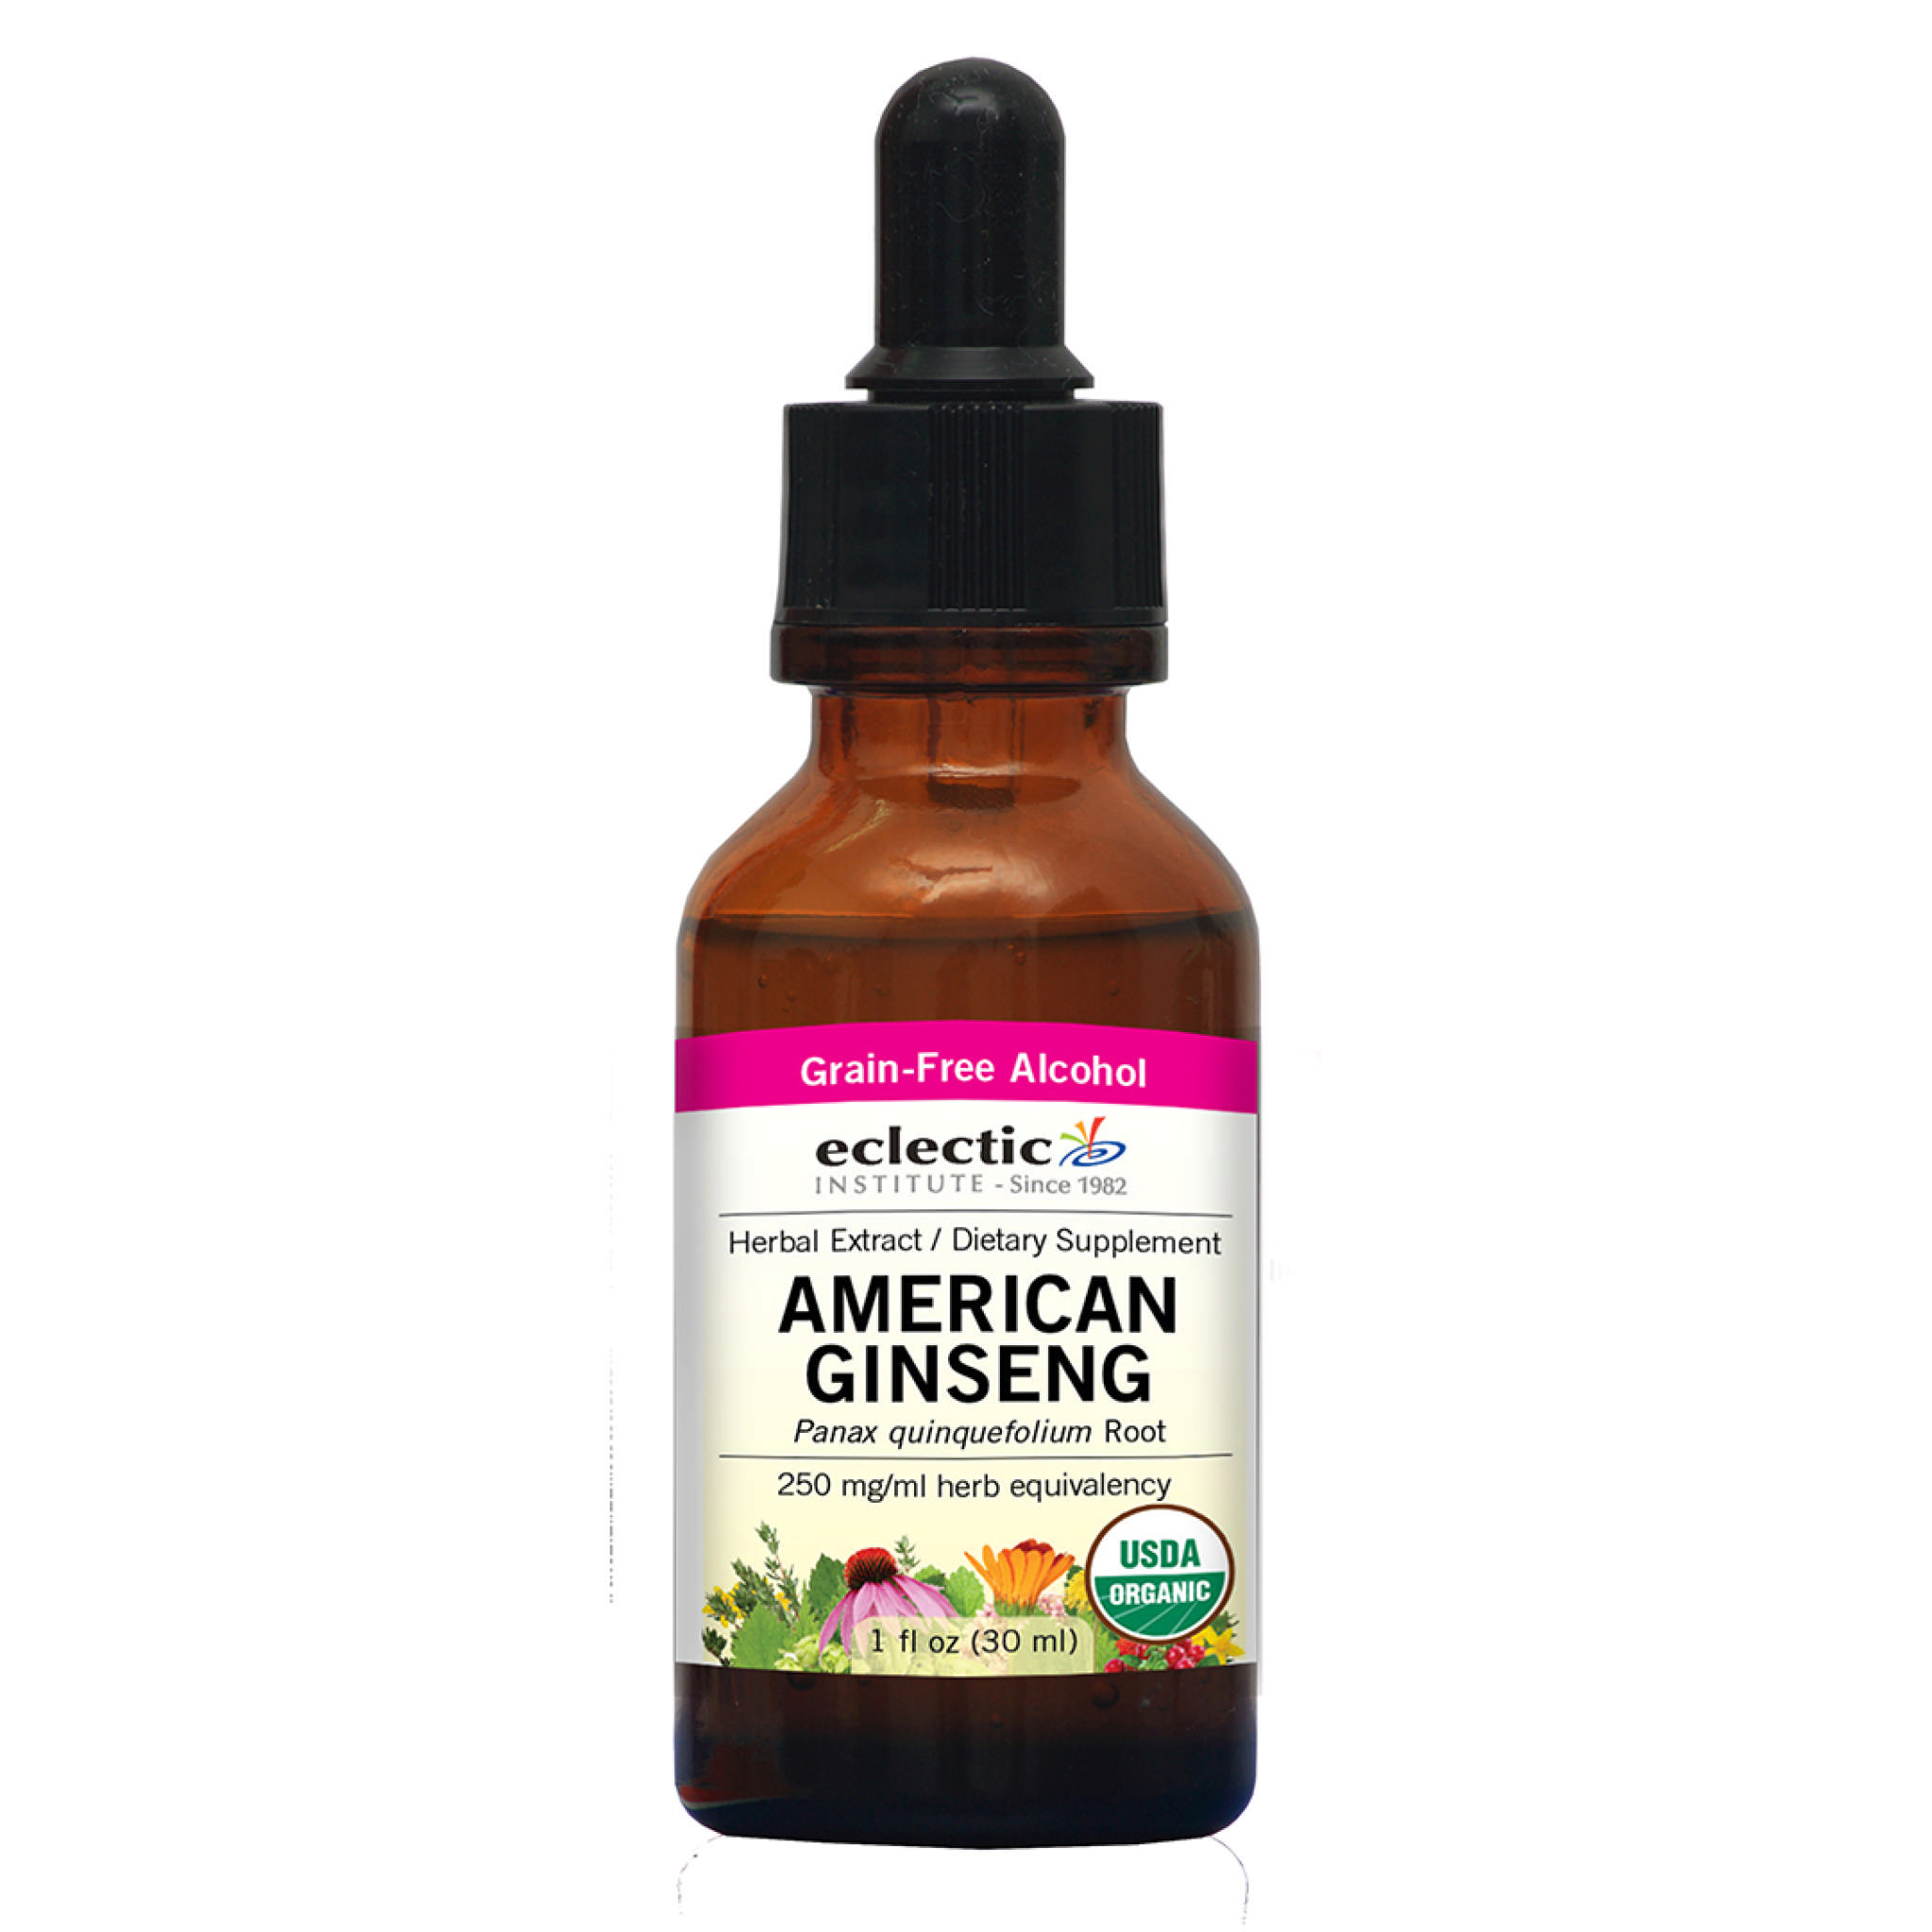 Eclectic Institute - Ginseng American Orgnol